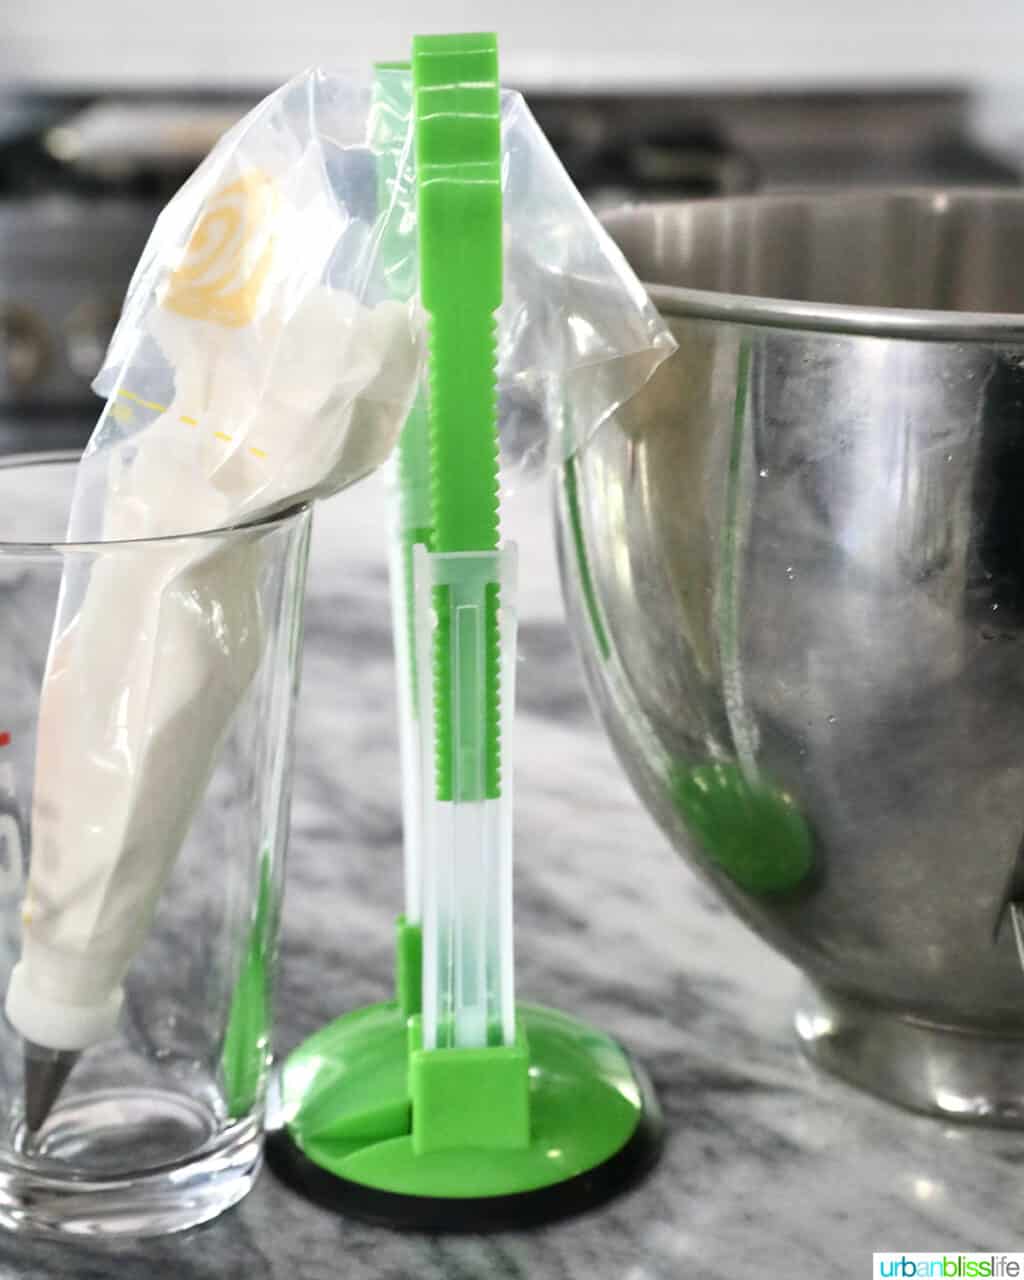 royal icing in a piping bag with bag stand and stainless steel bowl.